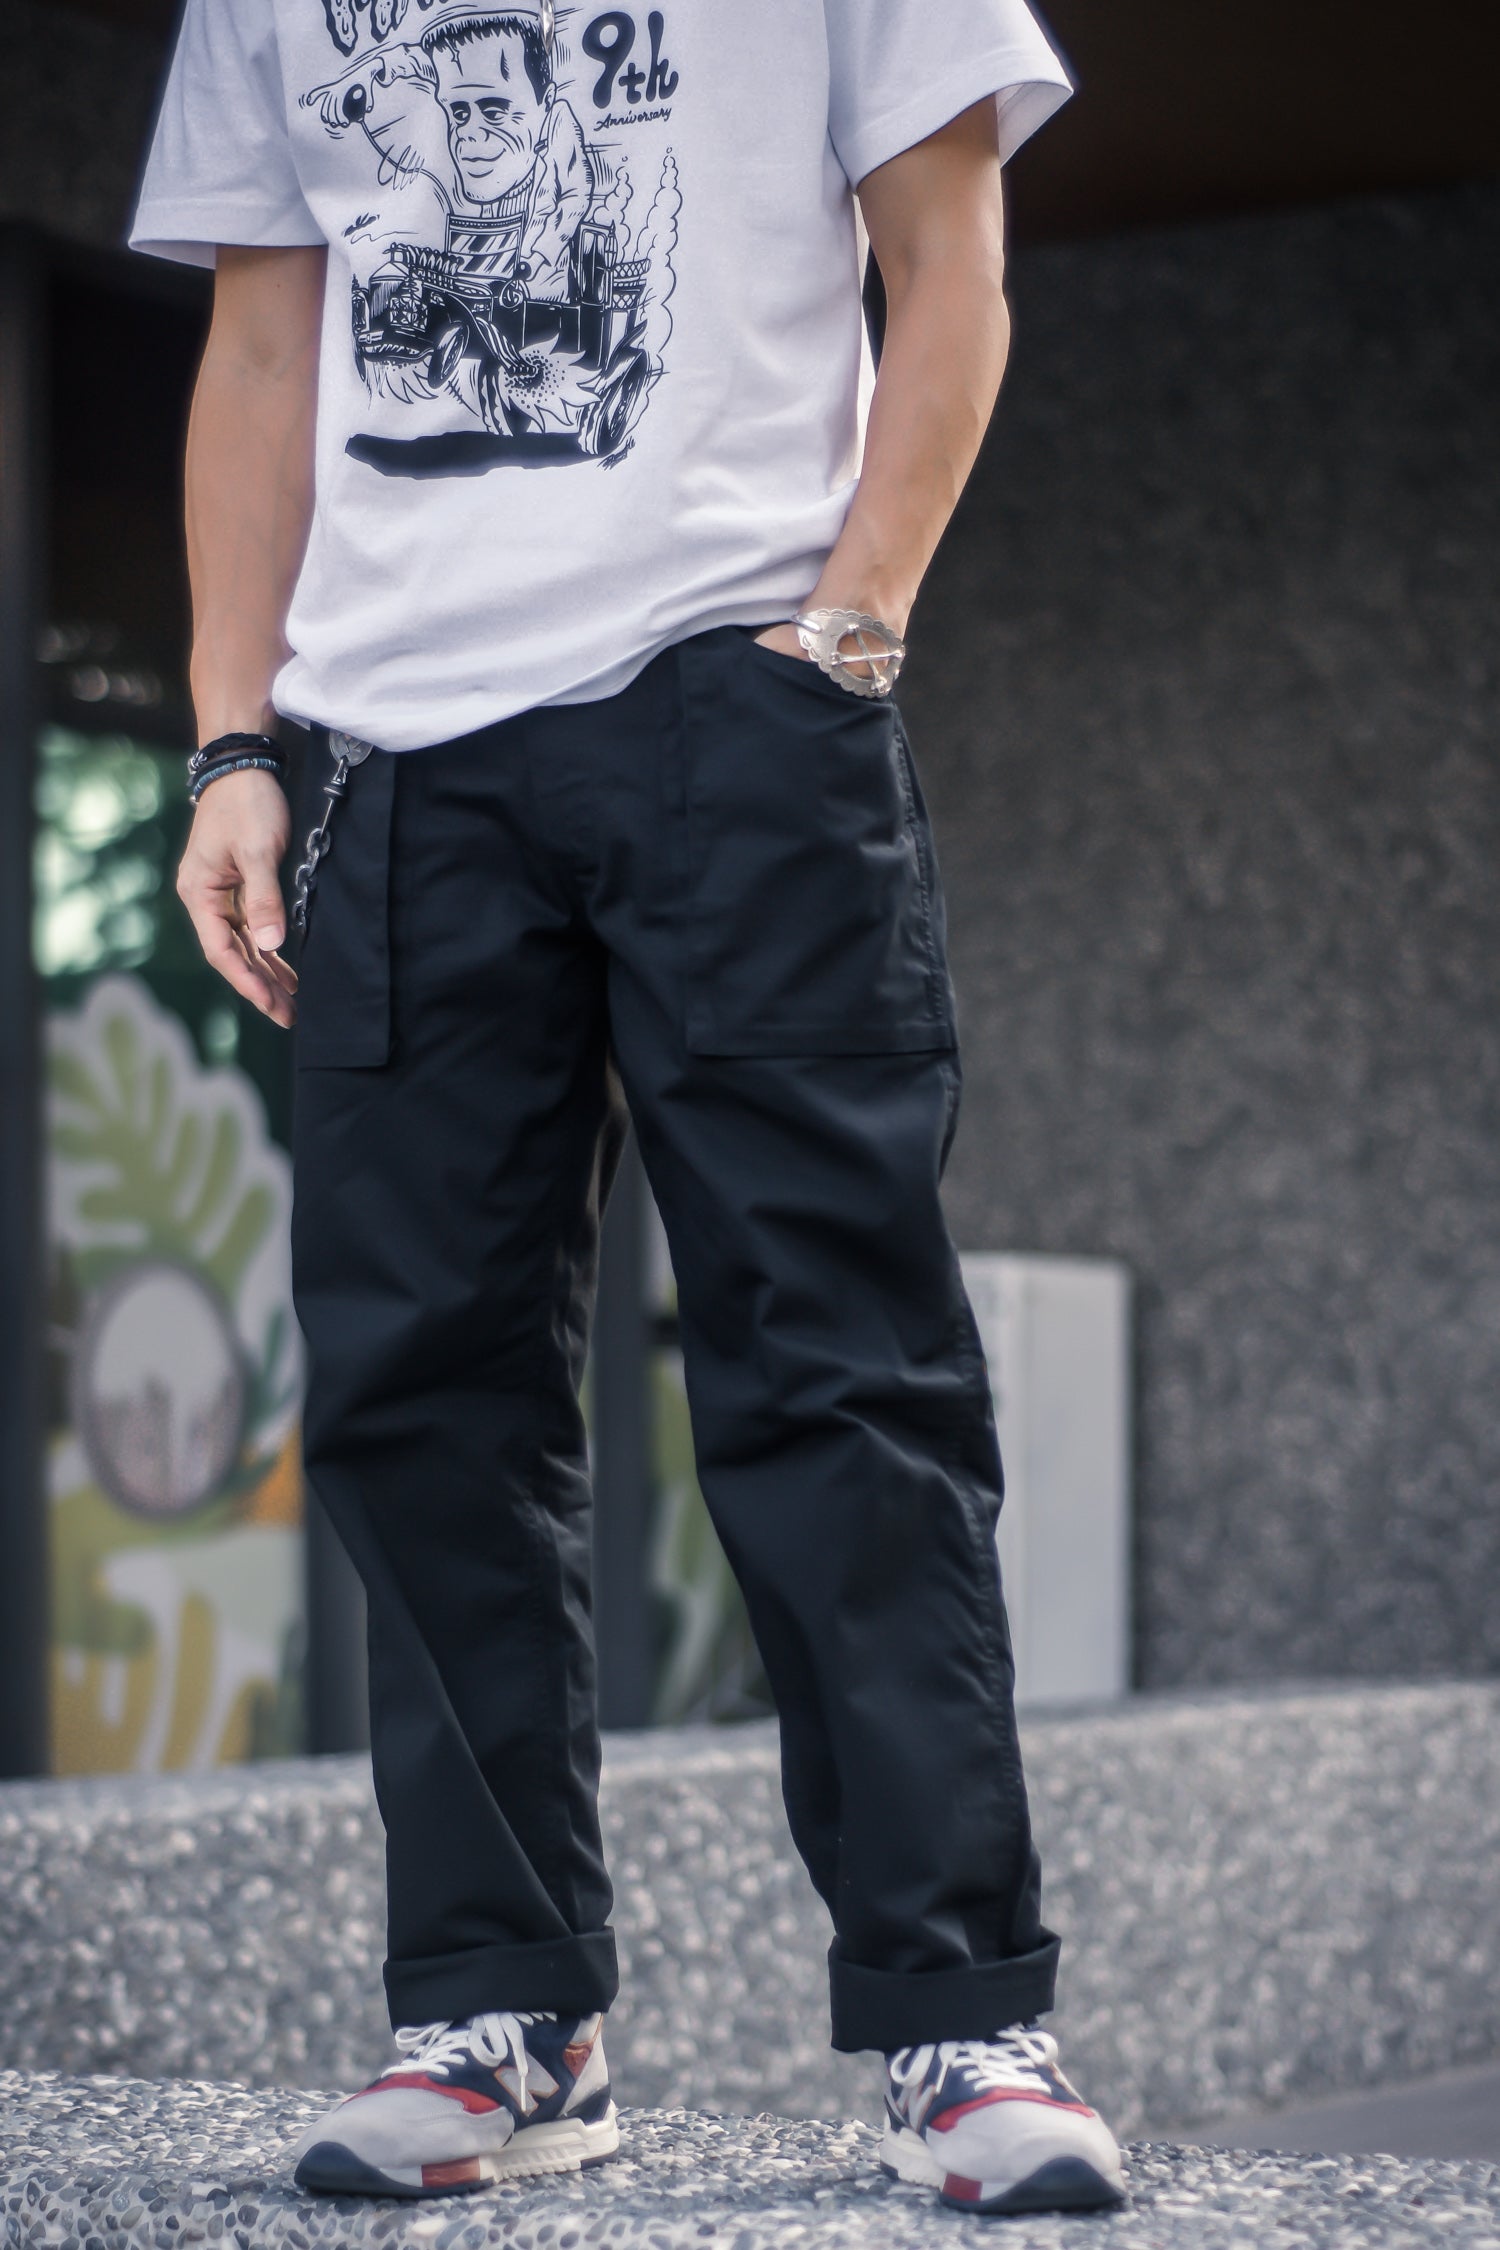 STAND UP PANTS - BLACK - May club